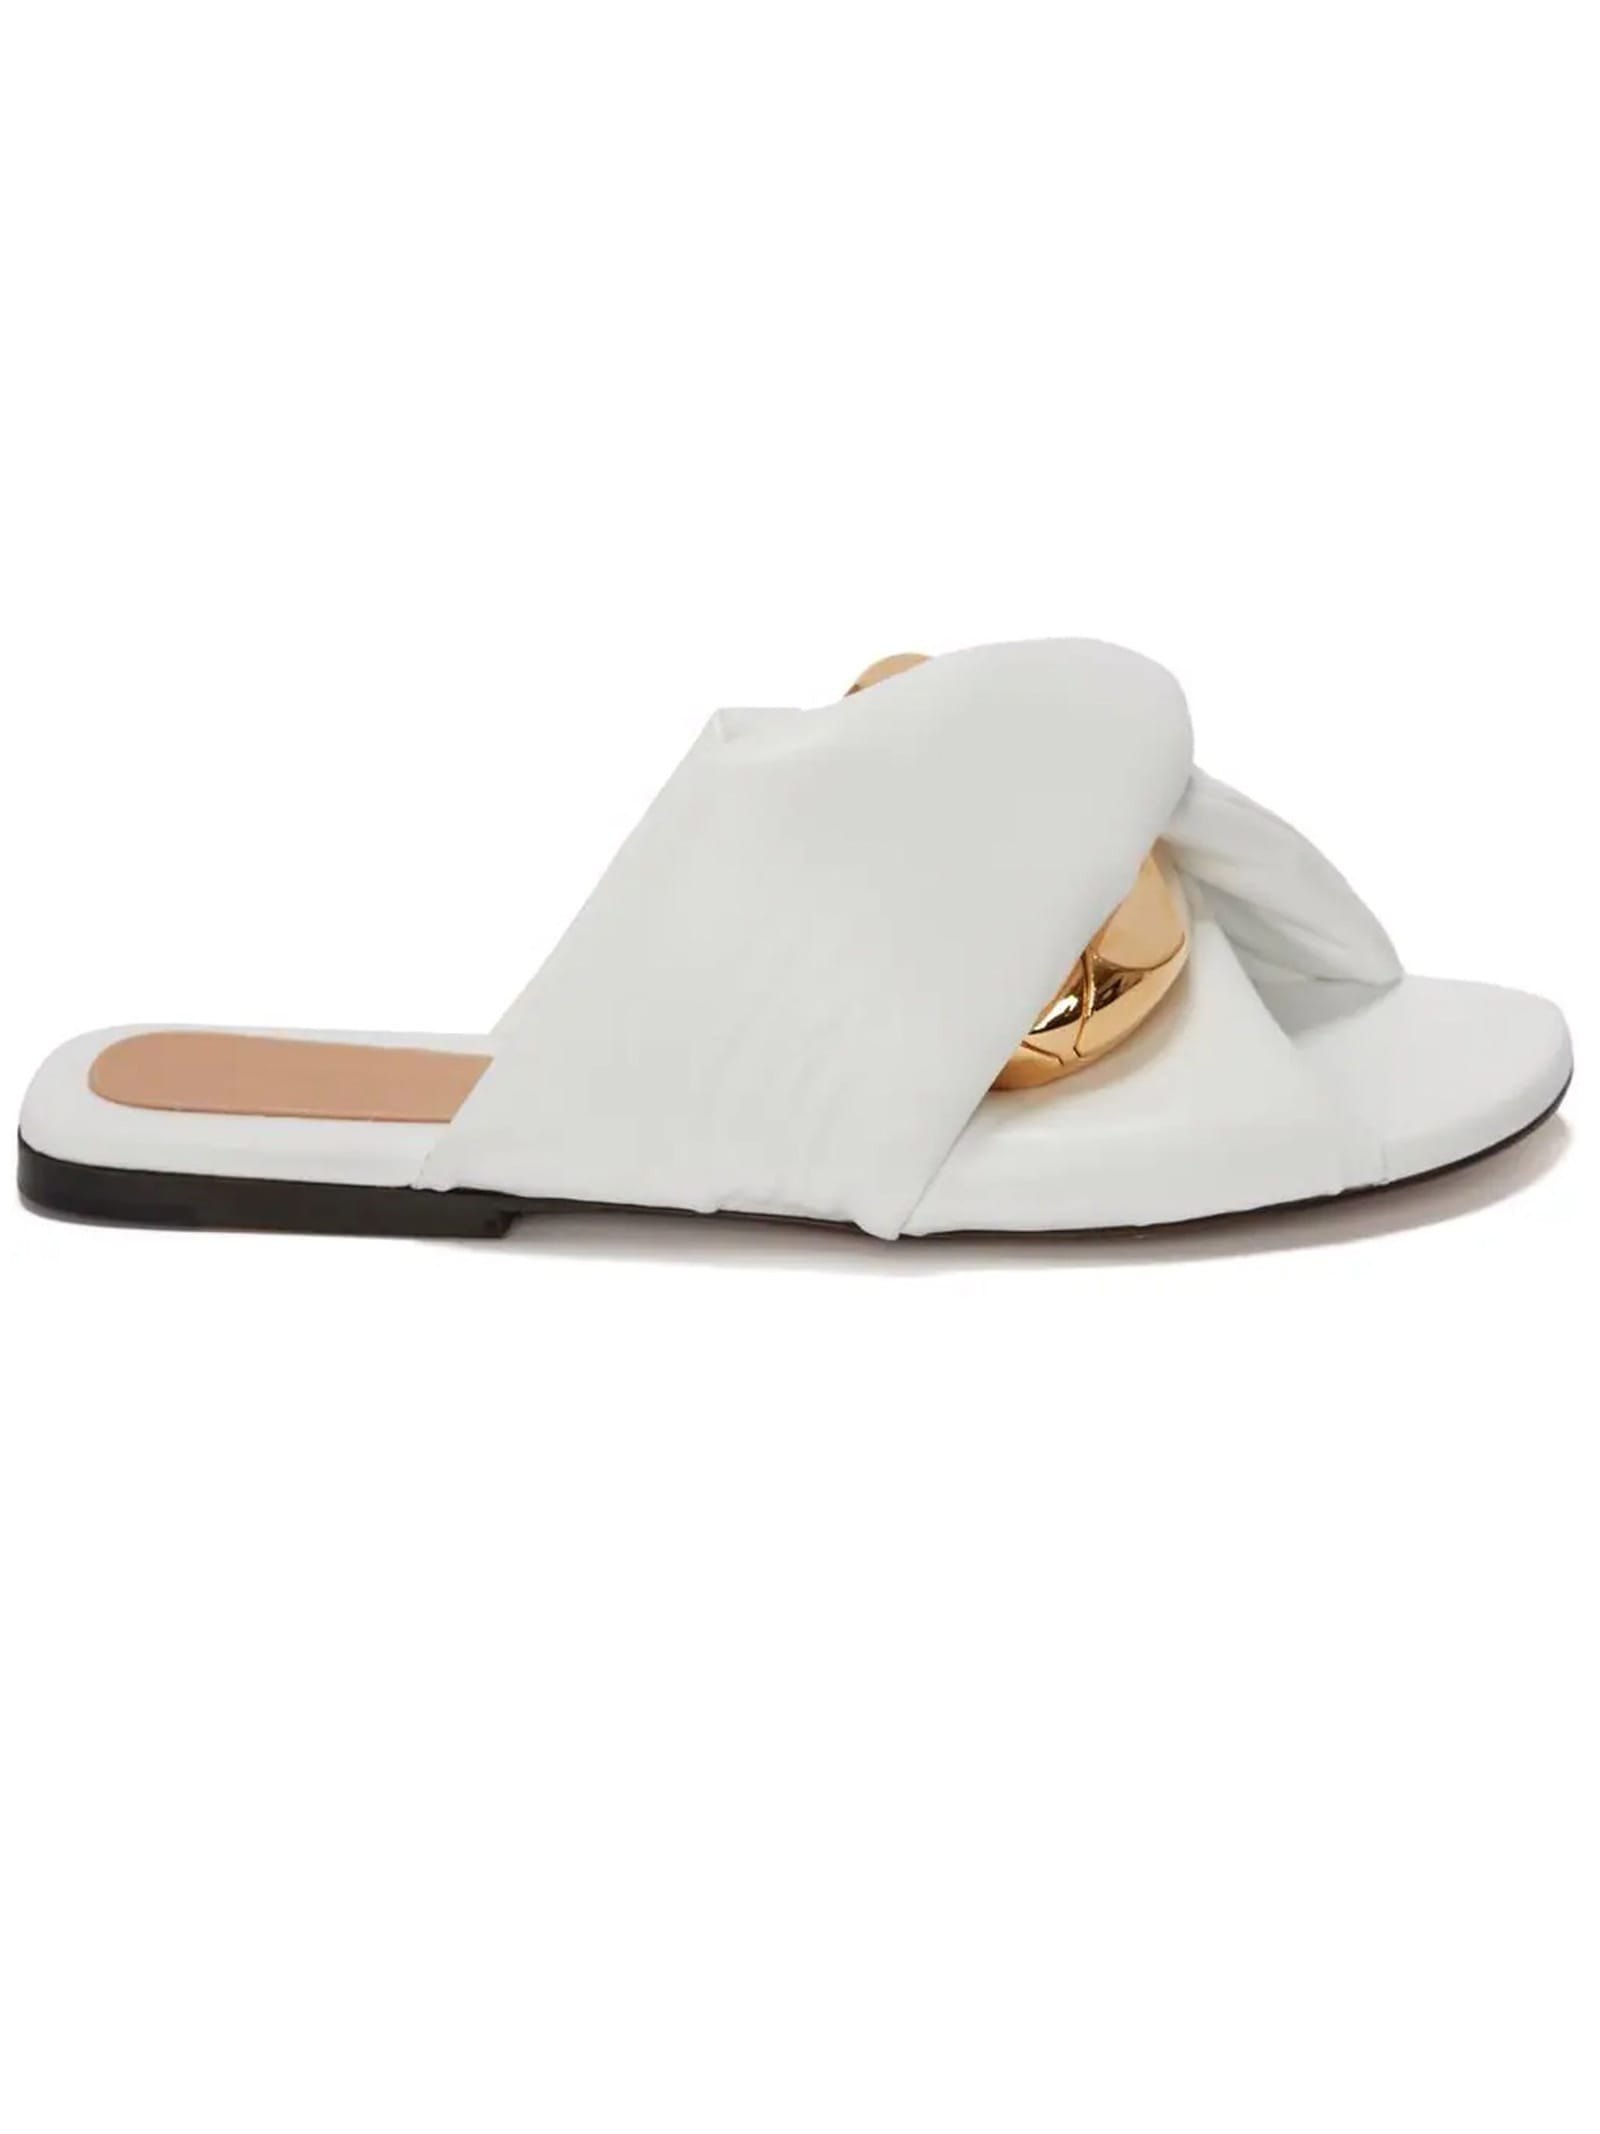 J.W. Anderson White Low Sandals